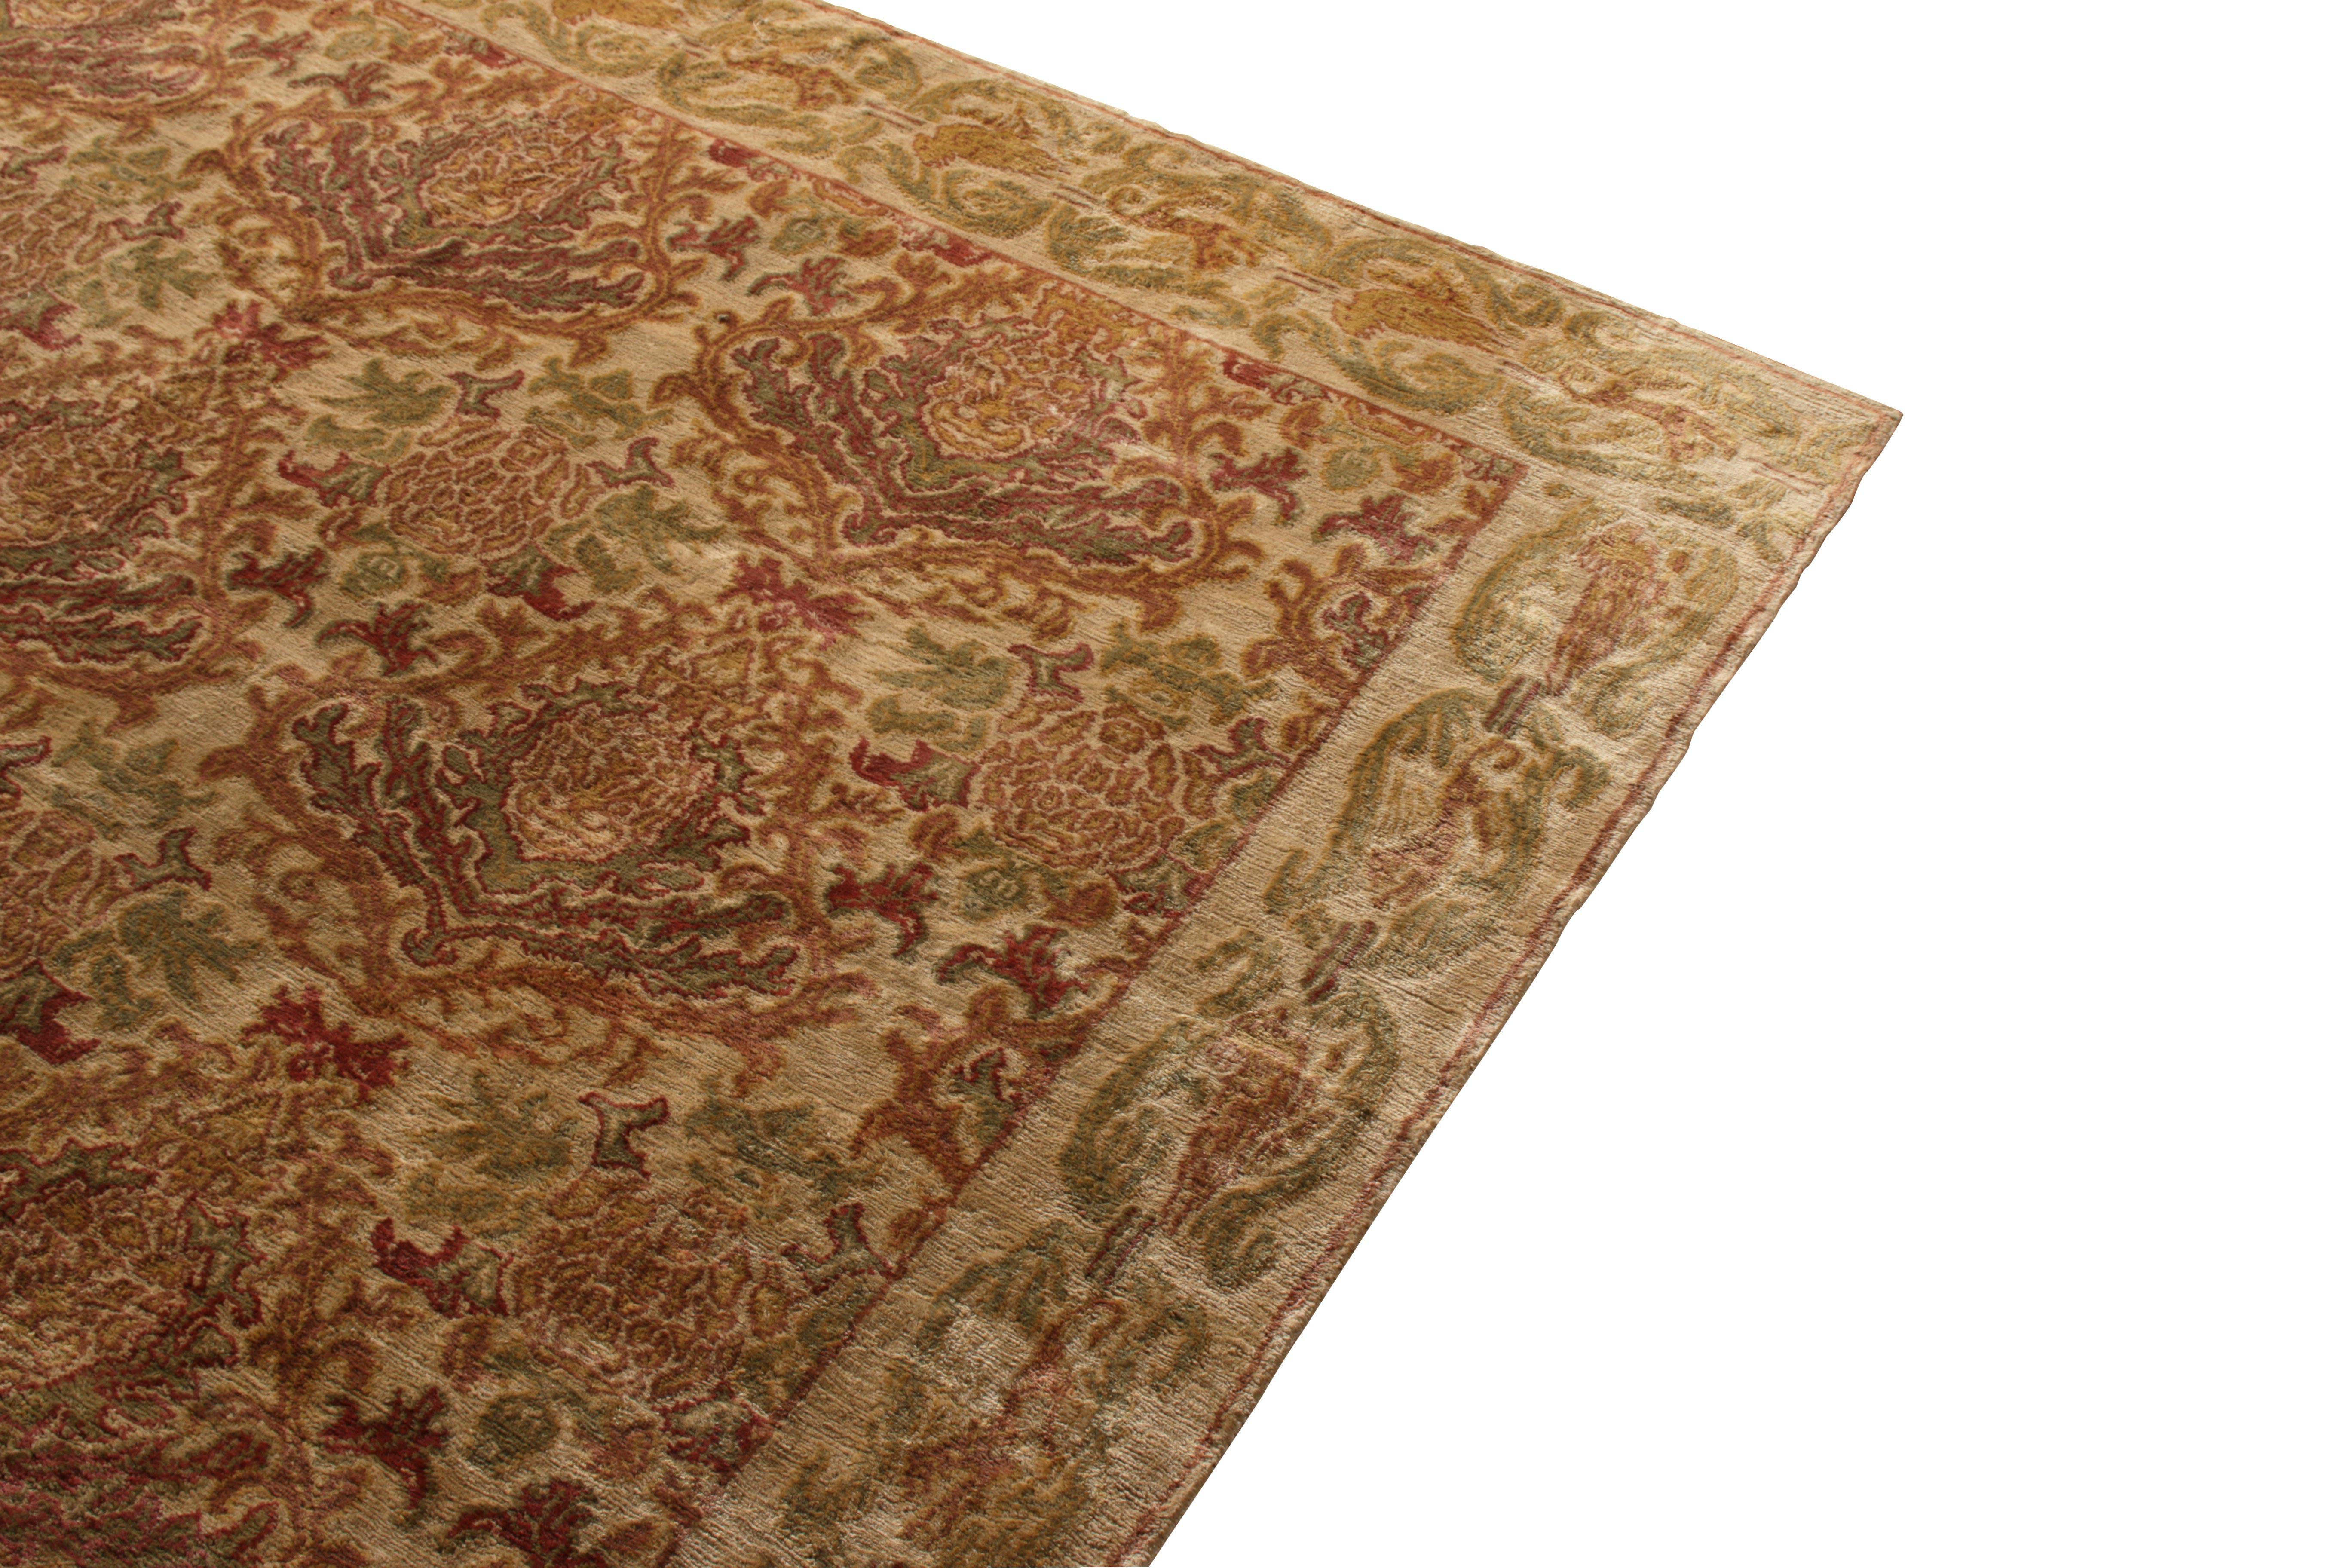 Nepalese Rug & Kilim's Hand Knotted European Style Rug Beige Brown Pink Floral Pattern For Sale